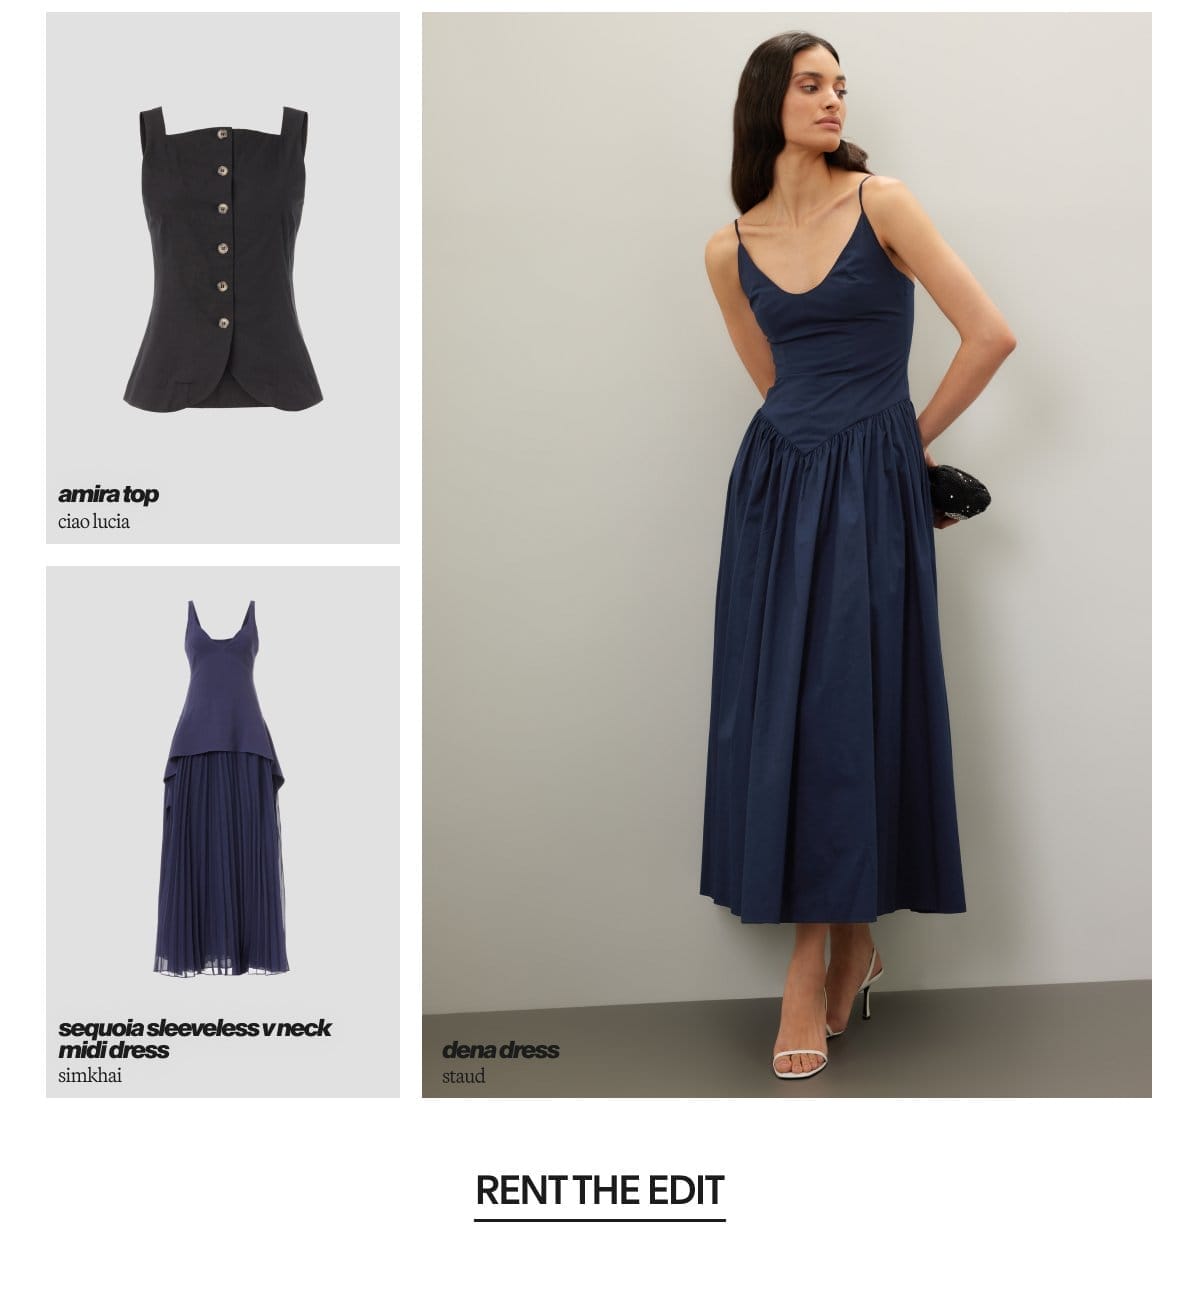 Trend report: accentuated waists | RENT THE EDIT